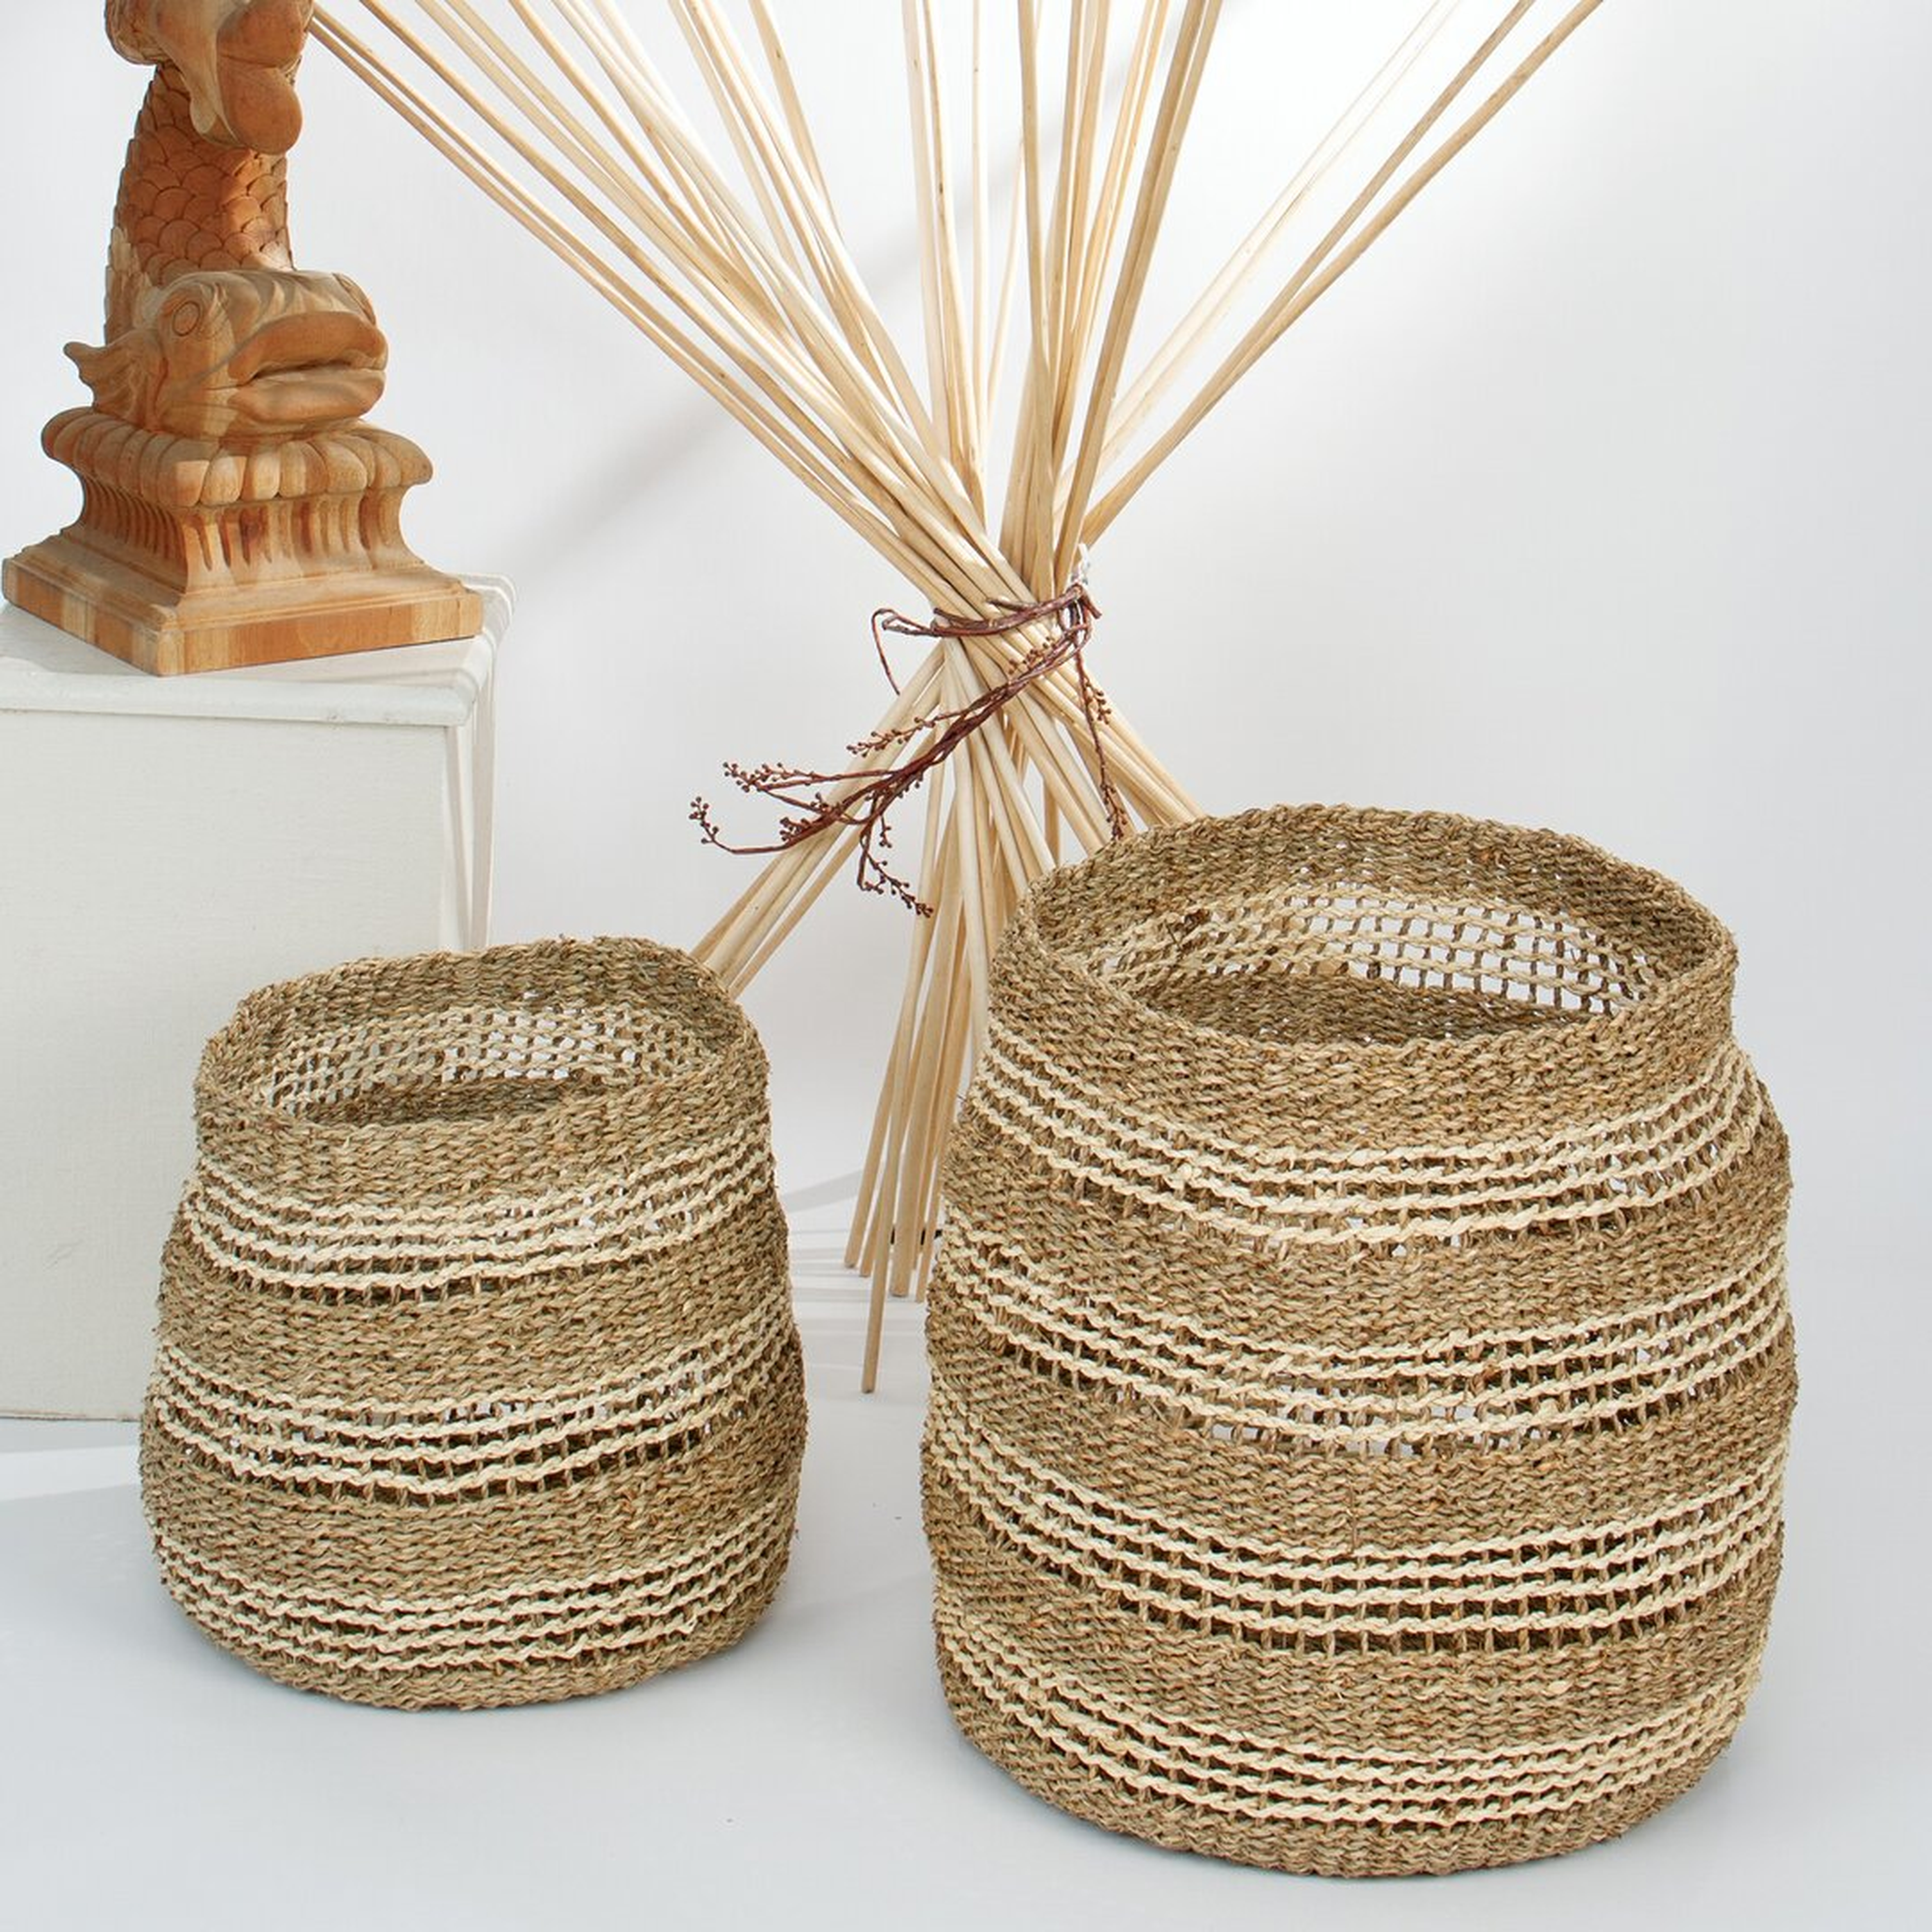 The Natural Light Wicker Baskets - Perigold